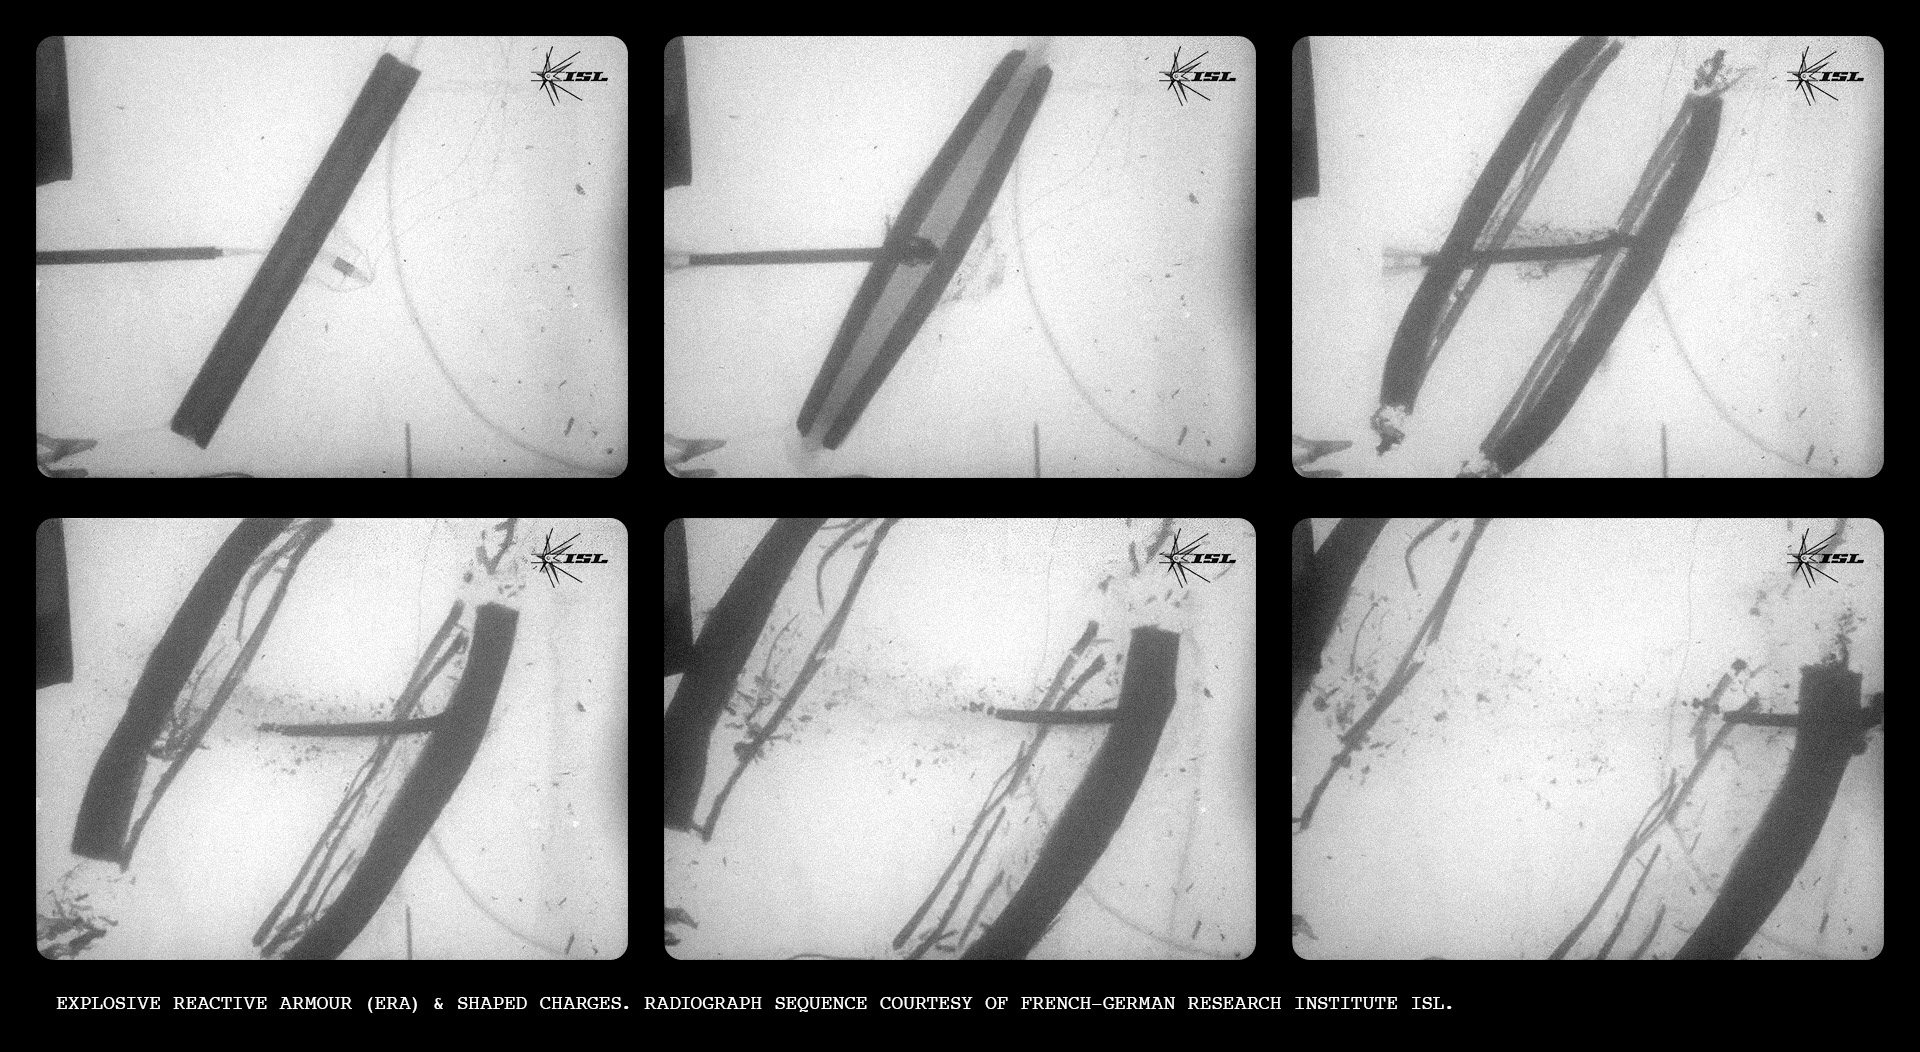 Explosive Reactive Armour (ERA) & Shaped Charges. Radiograph sequence Courtesy of French-German Research Institute ISL.